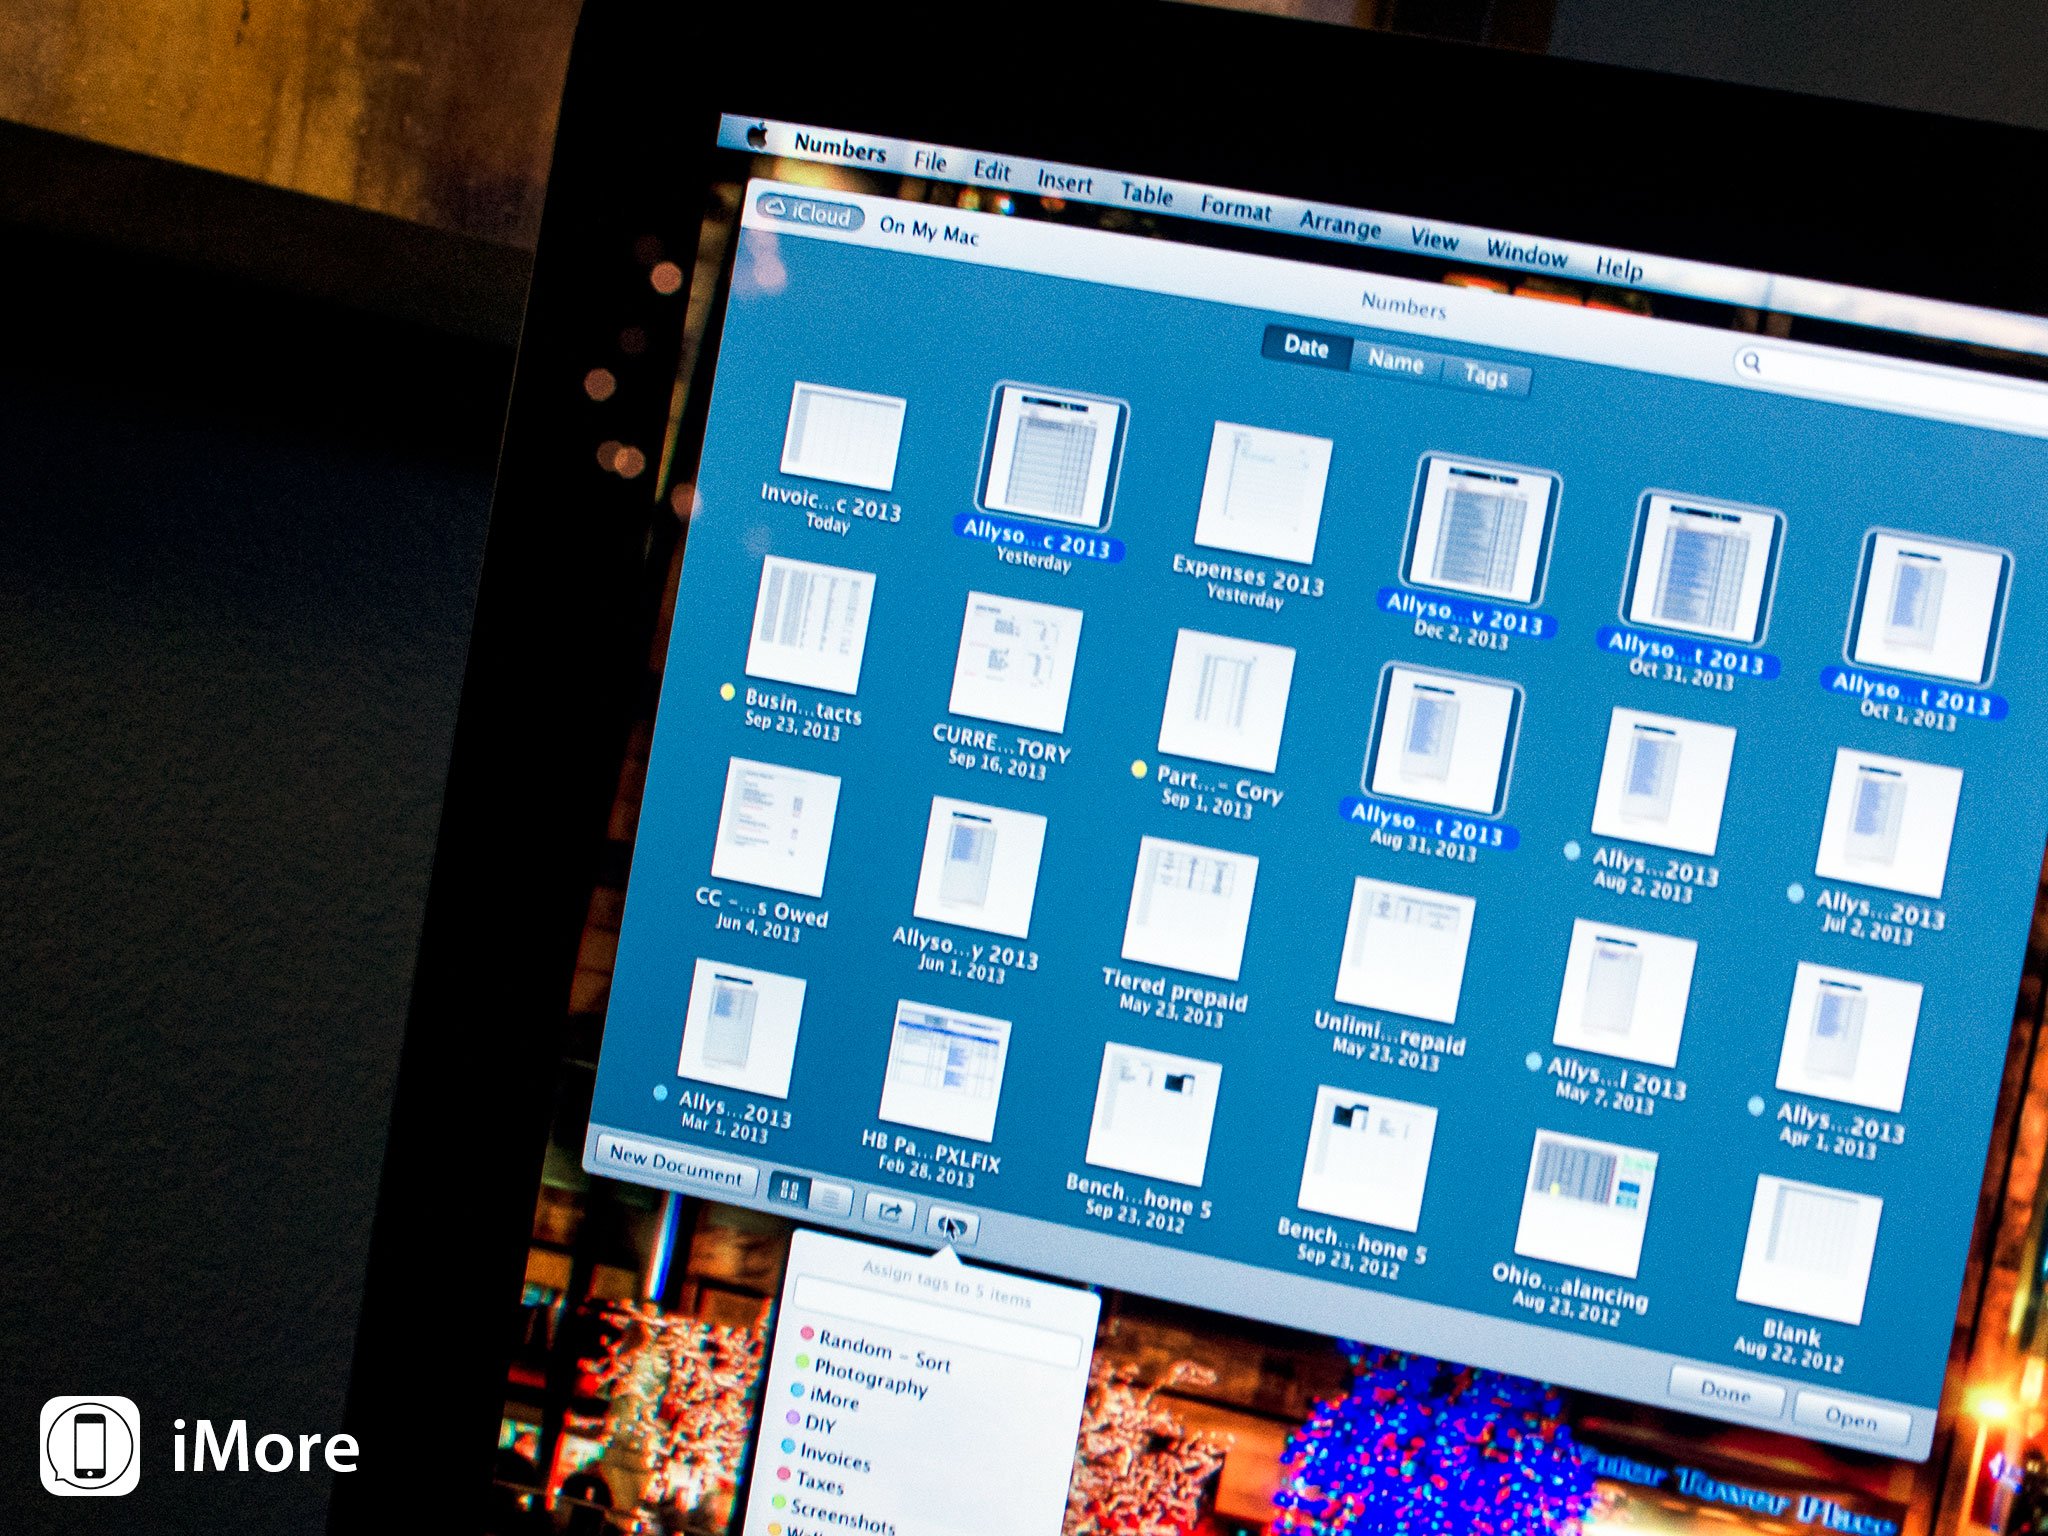 How to add Finder Tags to a file saved in iCloud with OS X Mavericks